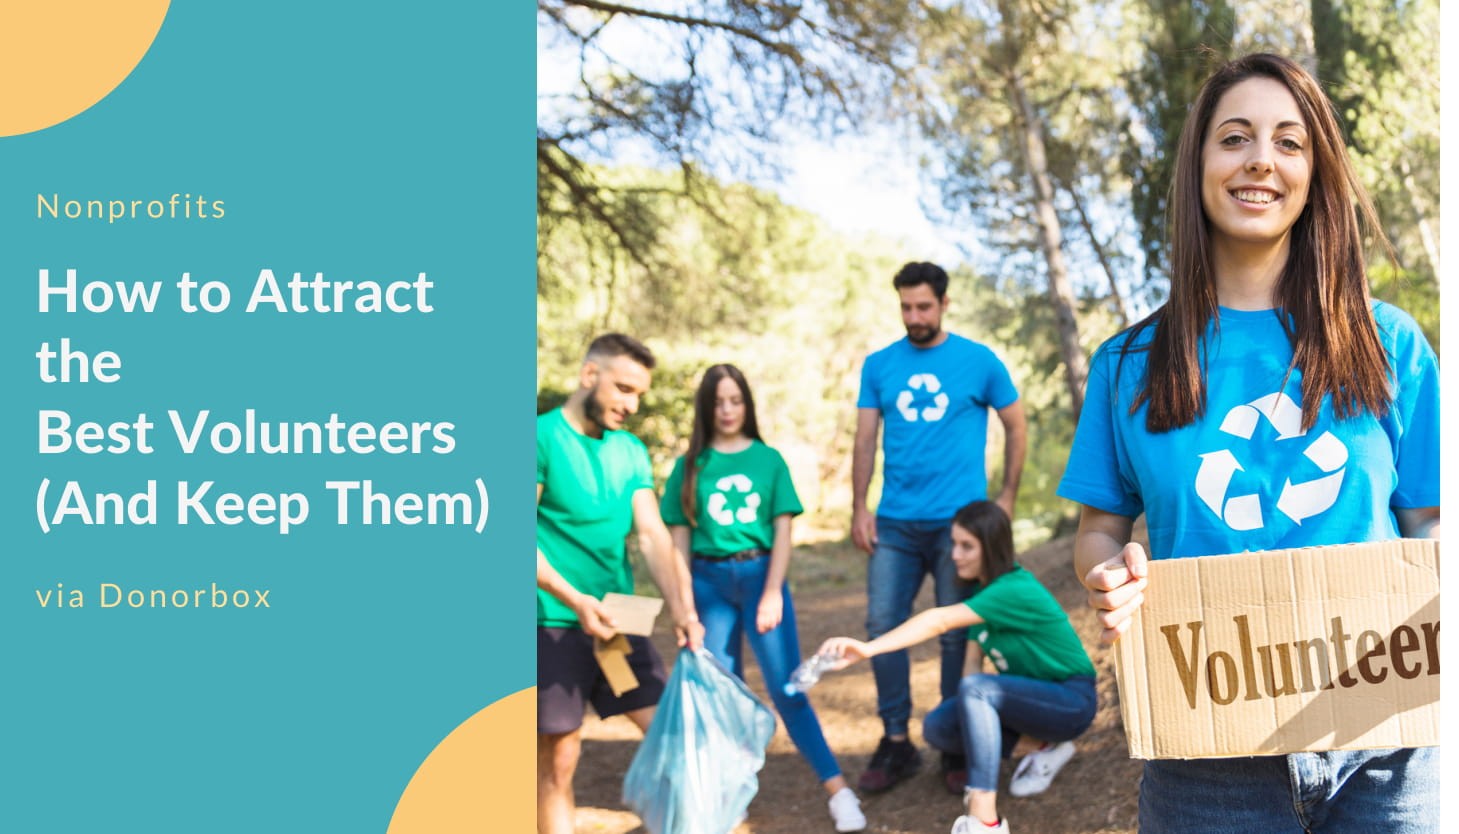 How to Attract & Recruit the Best Volunteers (And Keep Them)